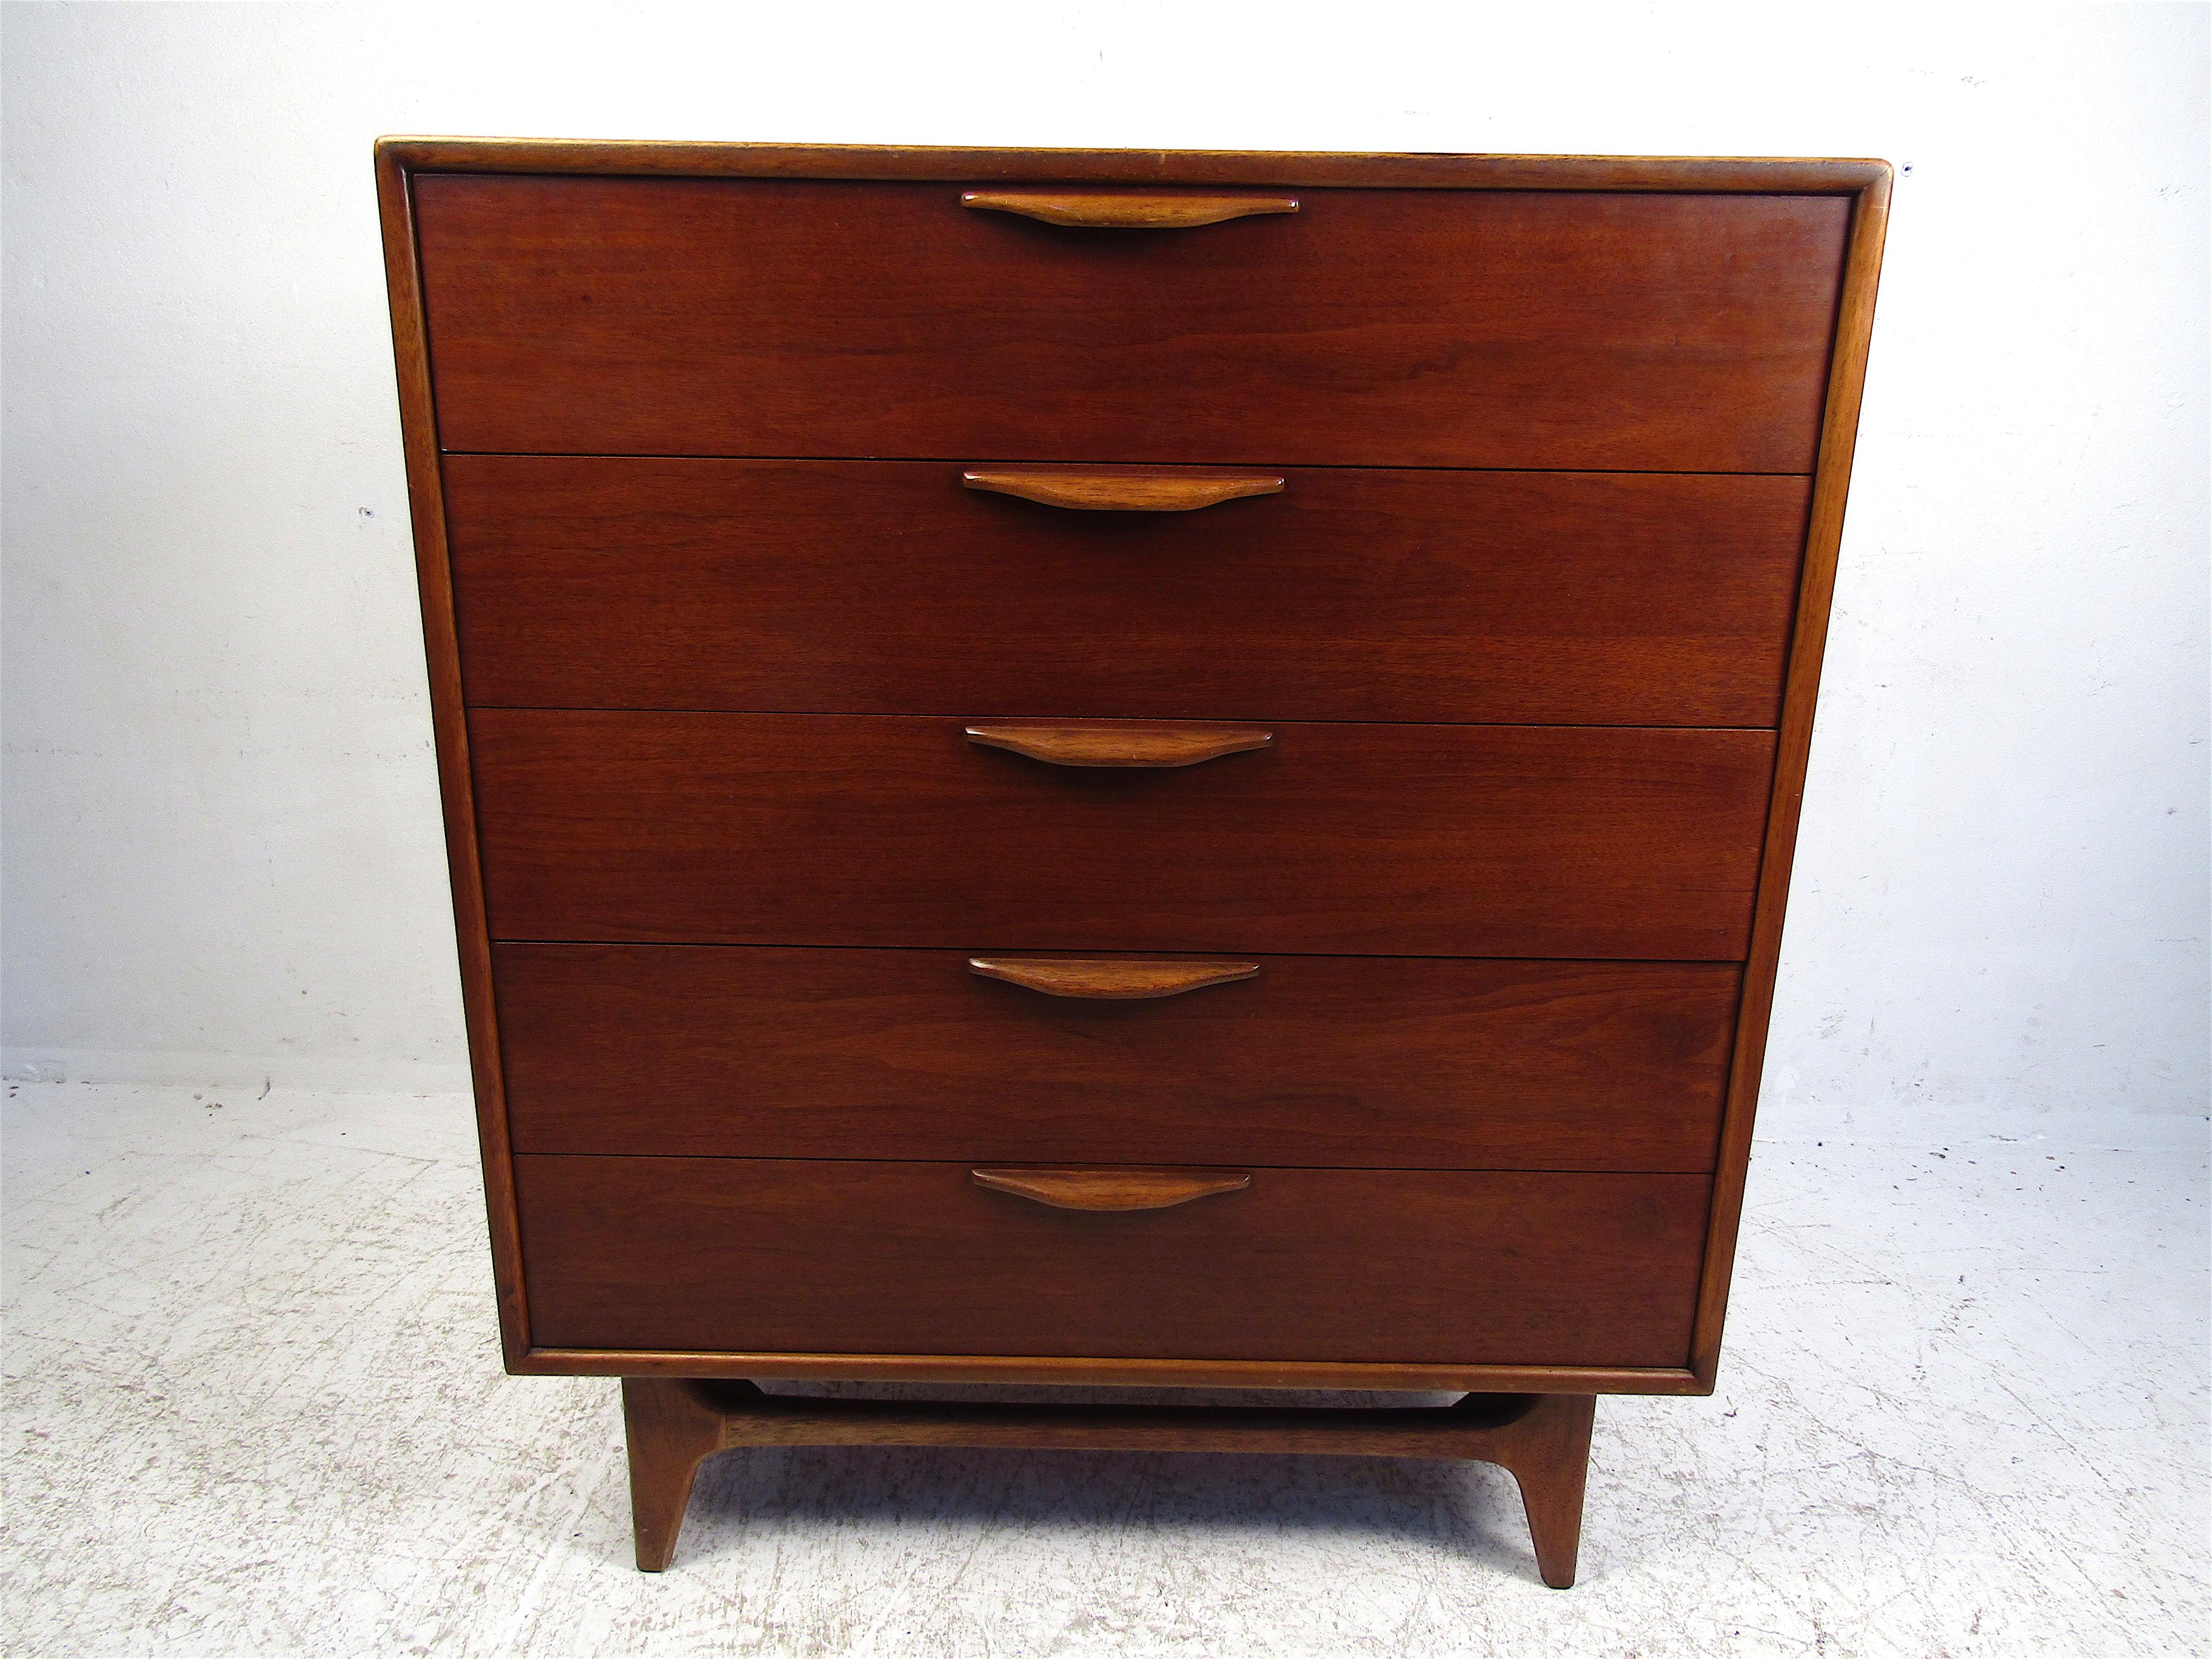 Stylish midcentury high dresser by Lane Furniture Co. Sculpted drawer pulls and a nice dark finish. Please confirm item location with dealer (NJ or NY).